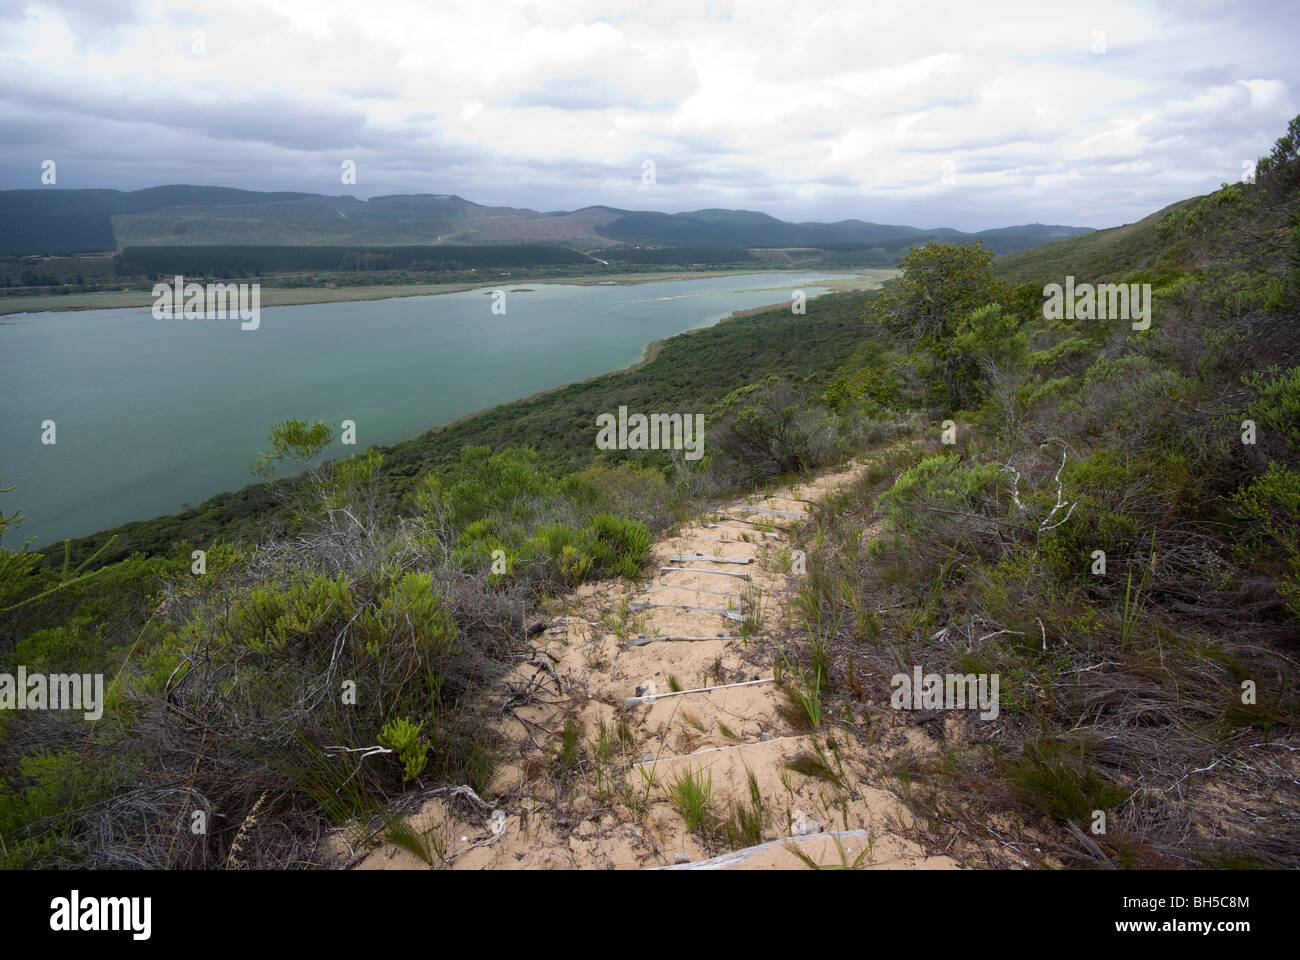 View from ancient sand dunes in the Goukamma Nature Reserve over Groenvlei, Sedgefield, South Africa Stock Photo